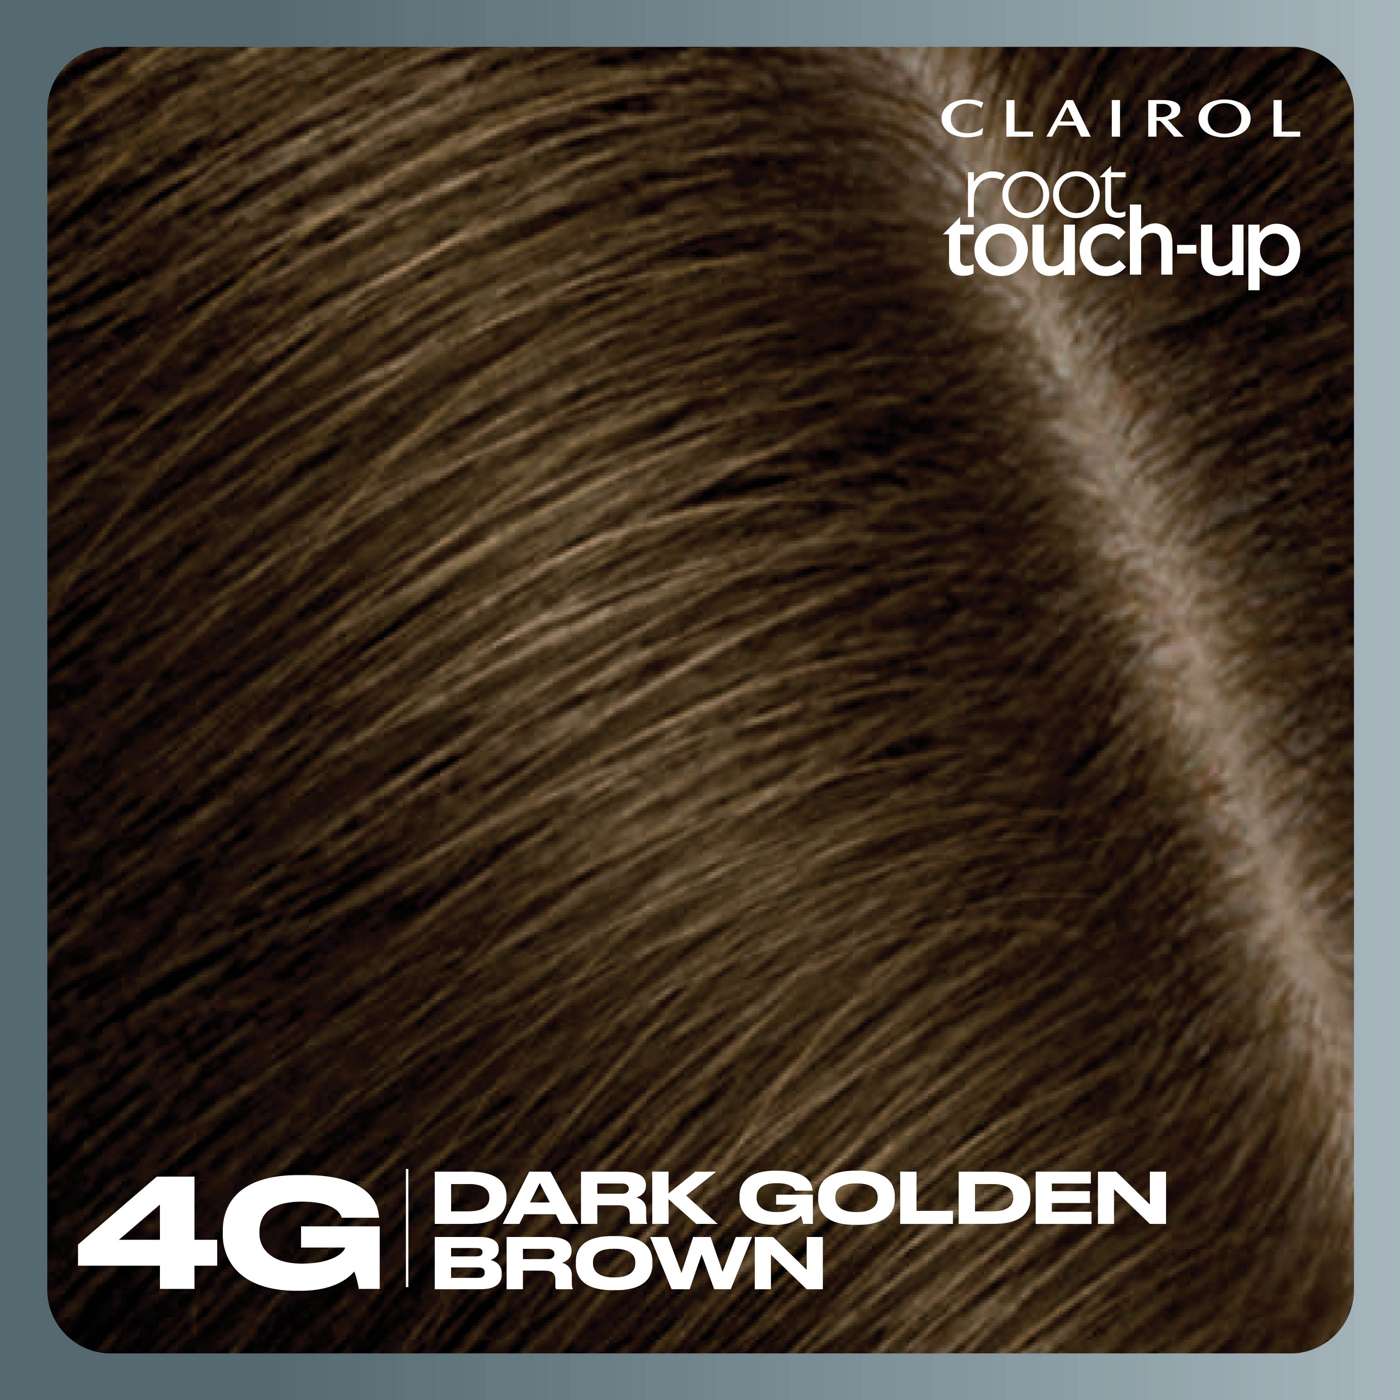 Clairol Nice 'N Easy Root Touch-Up Hair Color - 4G Dark Golden Brown; image 9 of 10